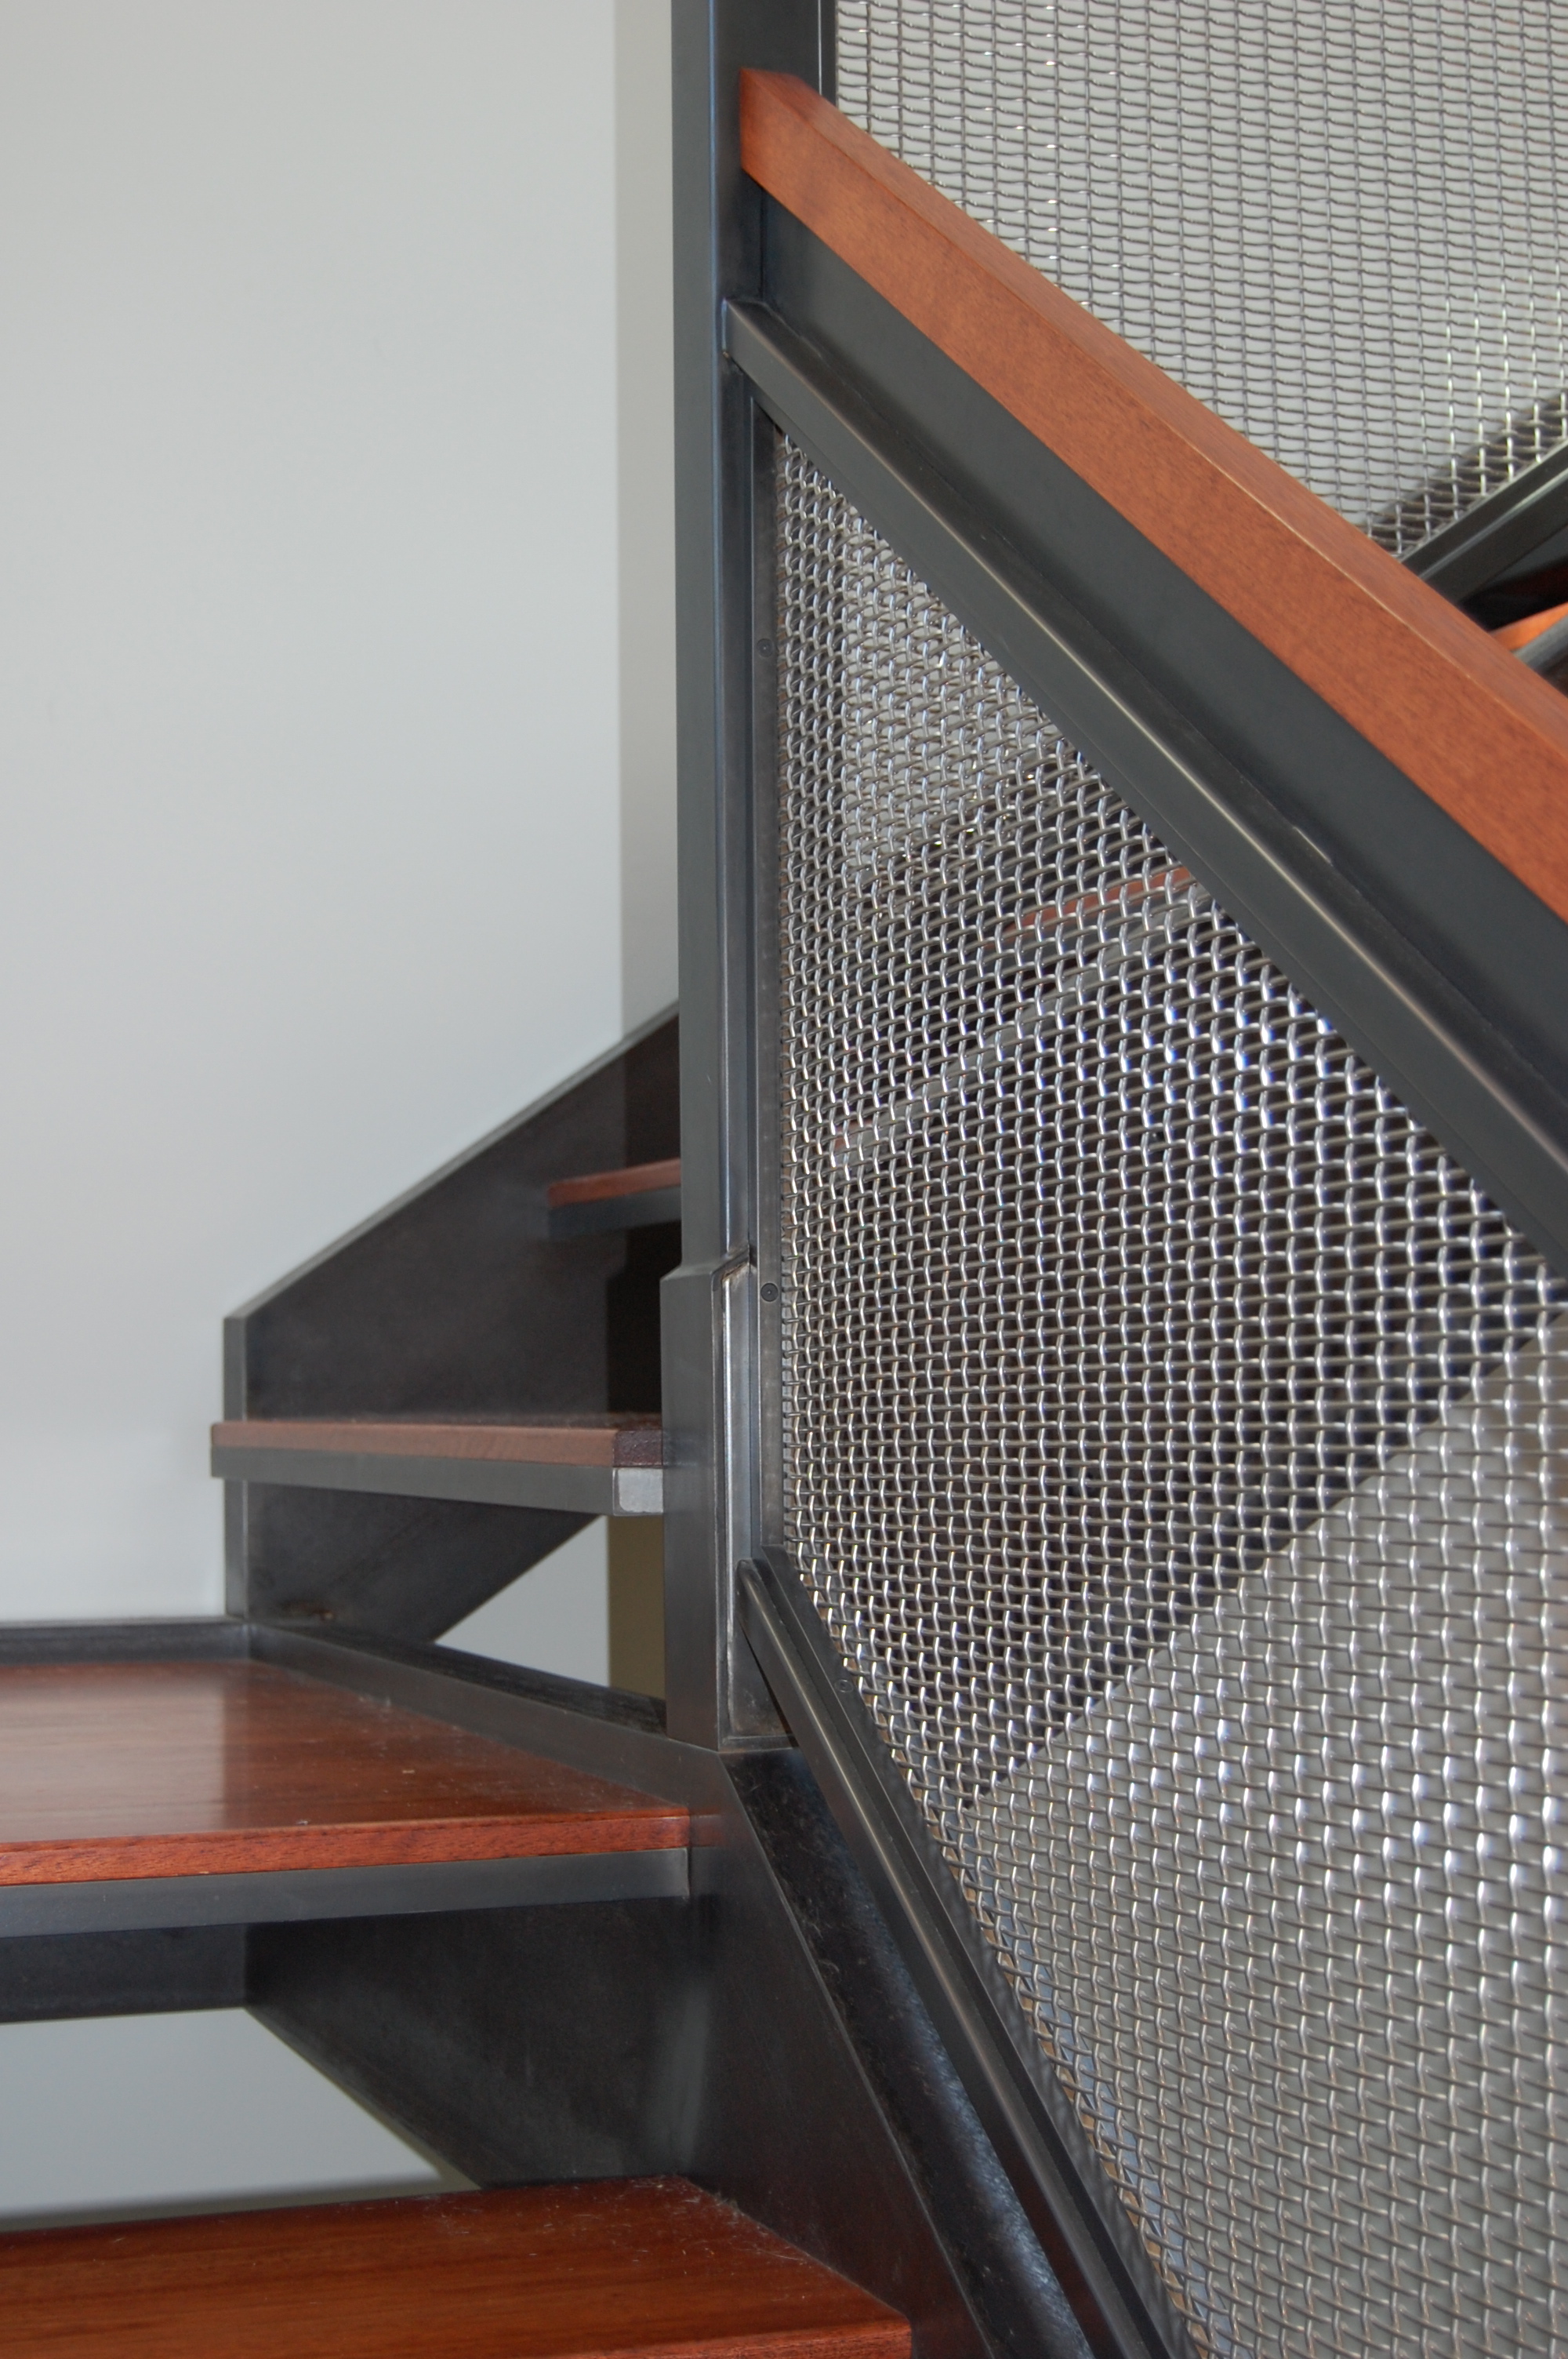  Blackened steel railing with stainless woven wire mesh.  Designed by Formed Objects 